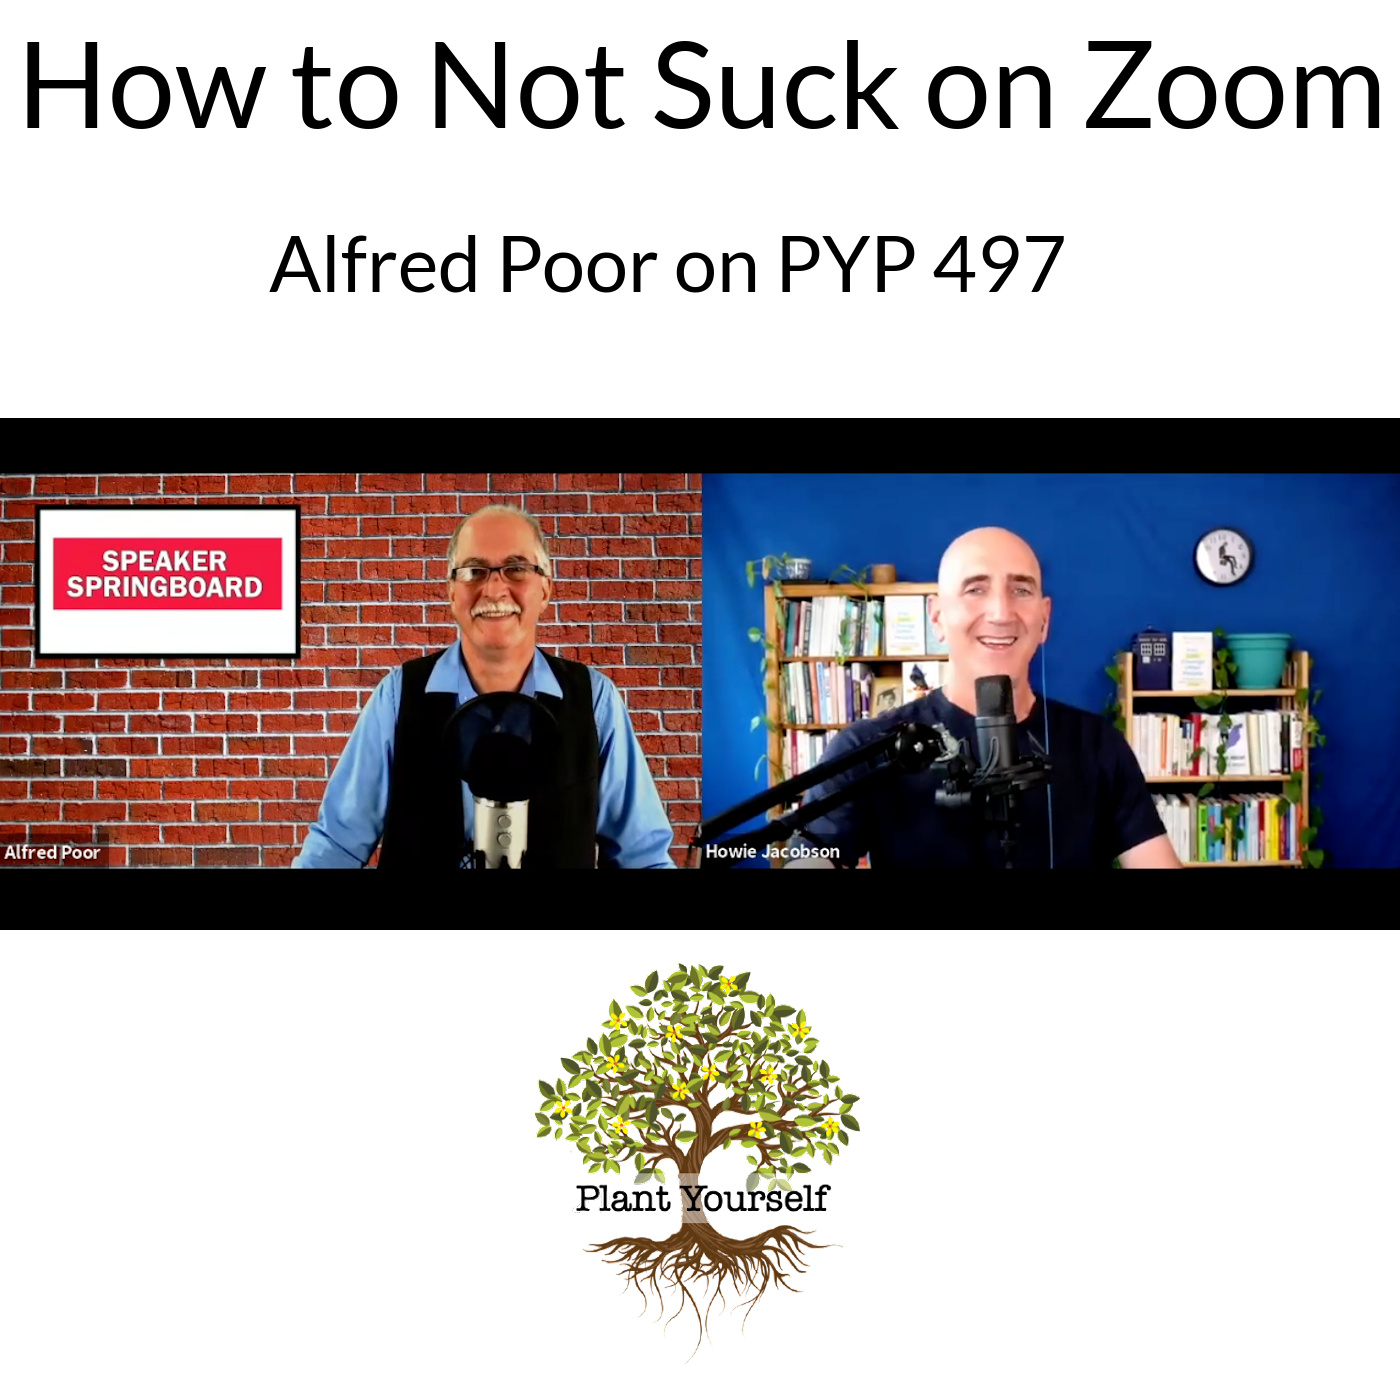 How to Not Suck on Zoom: Alfred Poor on PYP 497